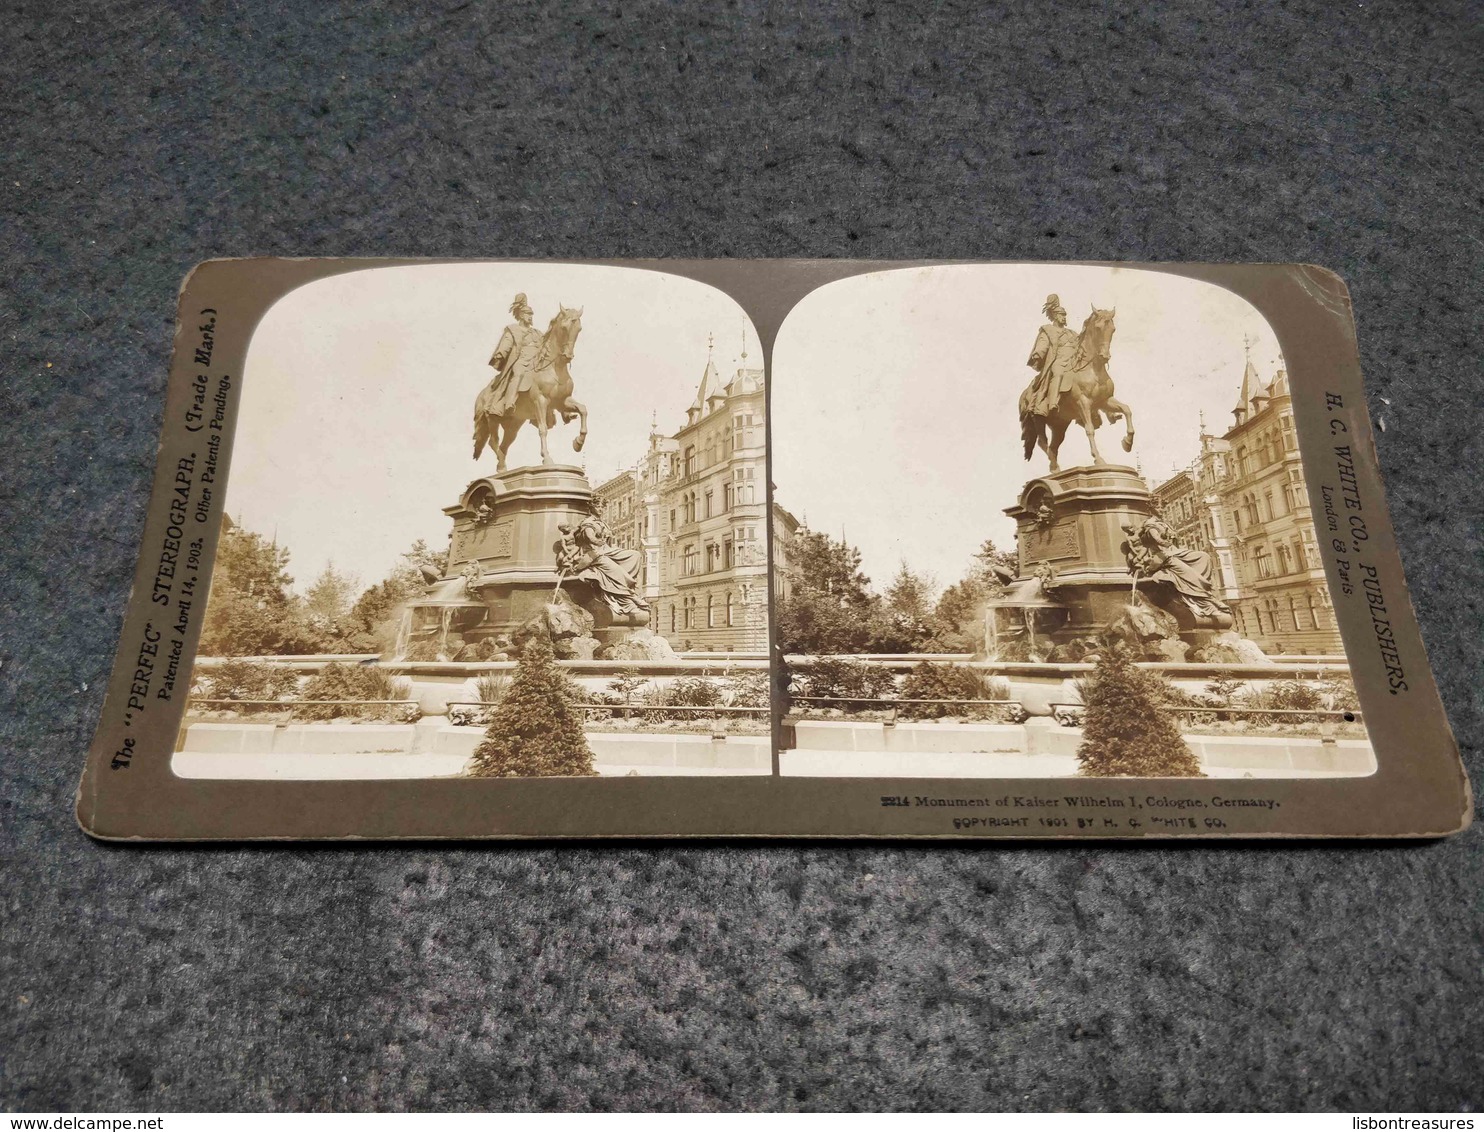 ANTIQUE STEREOSCOPIC REAL PHOTO GERMANY - MONUMENT OF KAISER WILHEIM I - COLOGNE Nº 2214 - Stereoscopes - Side-by-side Viewers